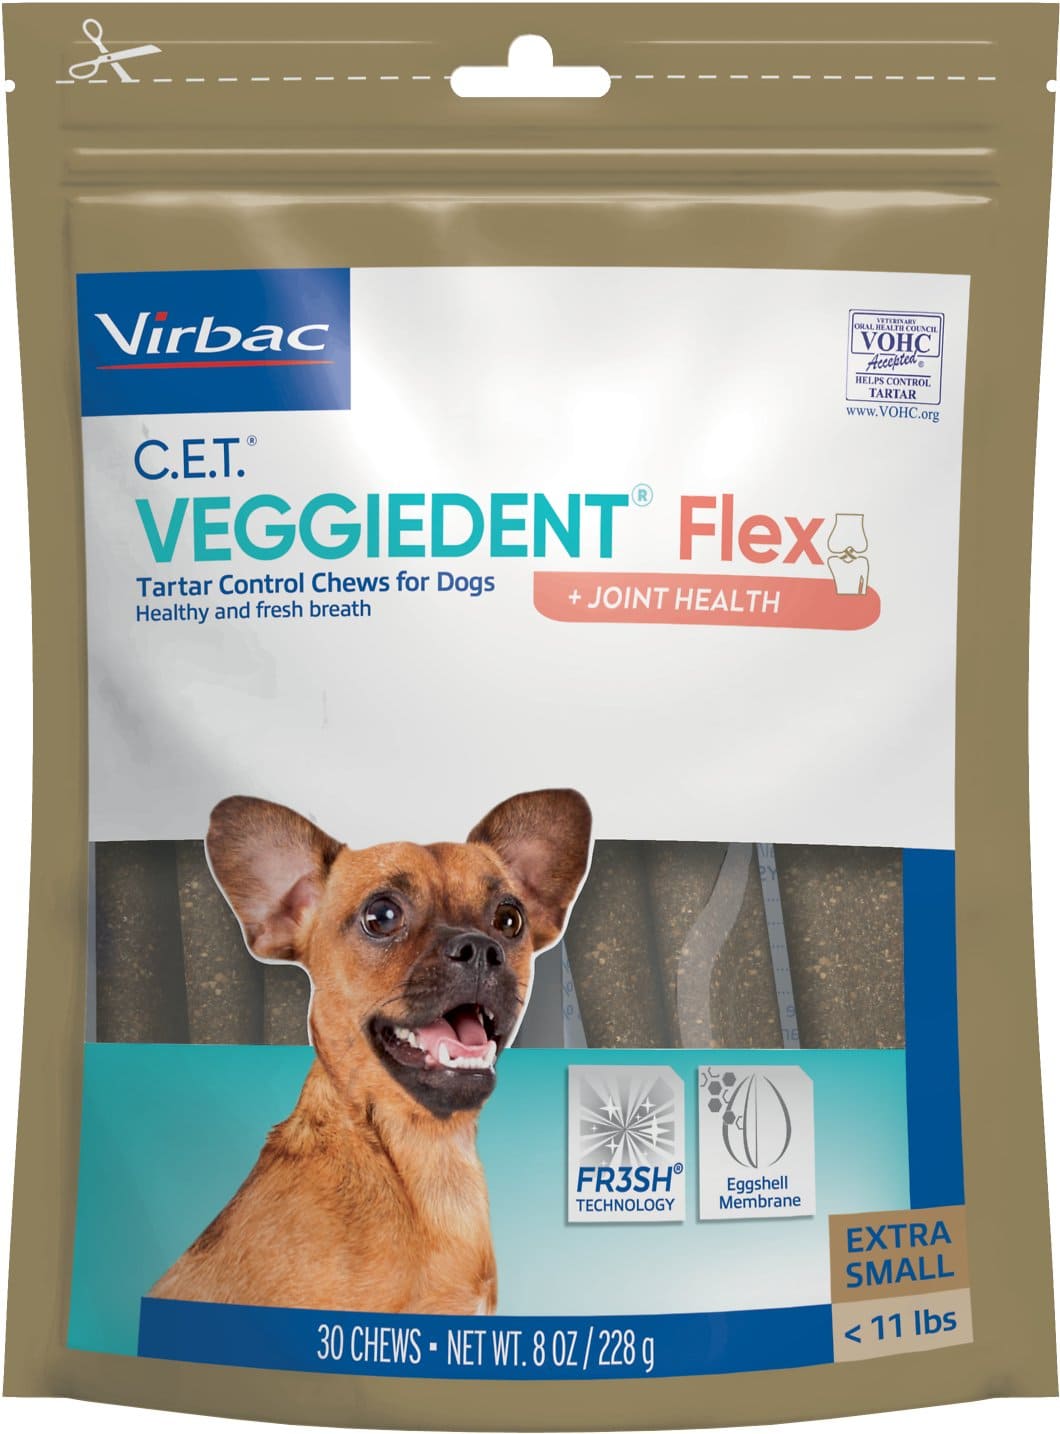 C.E.T. VeggieDent Flex + Salud Articular 30 chewxs for extra small dogs up to 11 bs 1